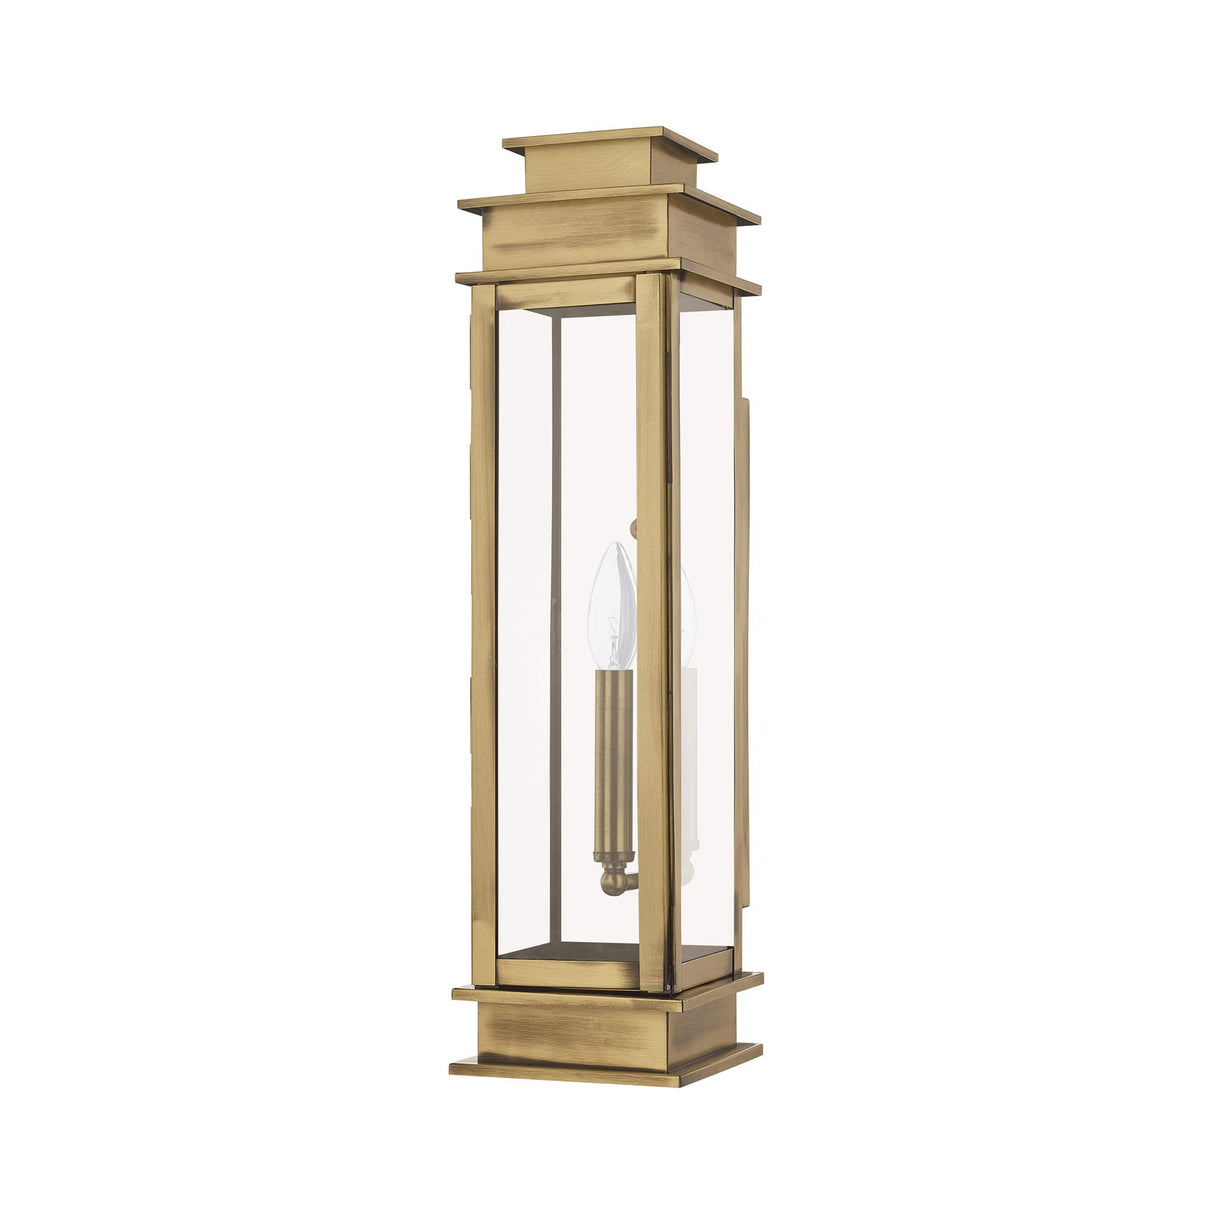 Livex 20207-01 Transitional One Light Outdoor Wall Lantern from Princeton Collection Finish, Antique Brass